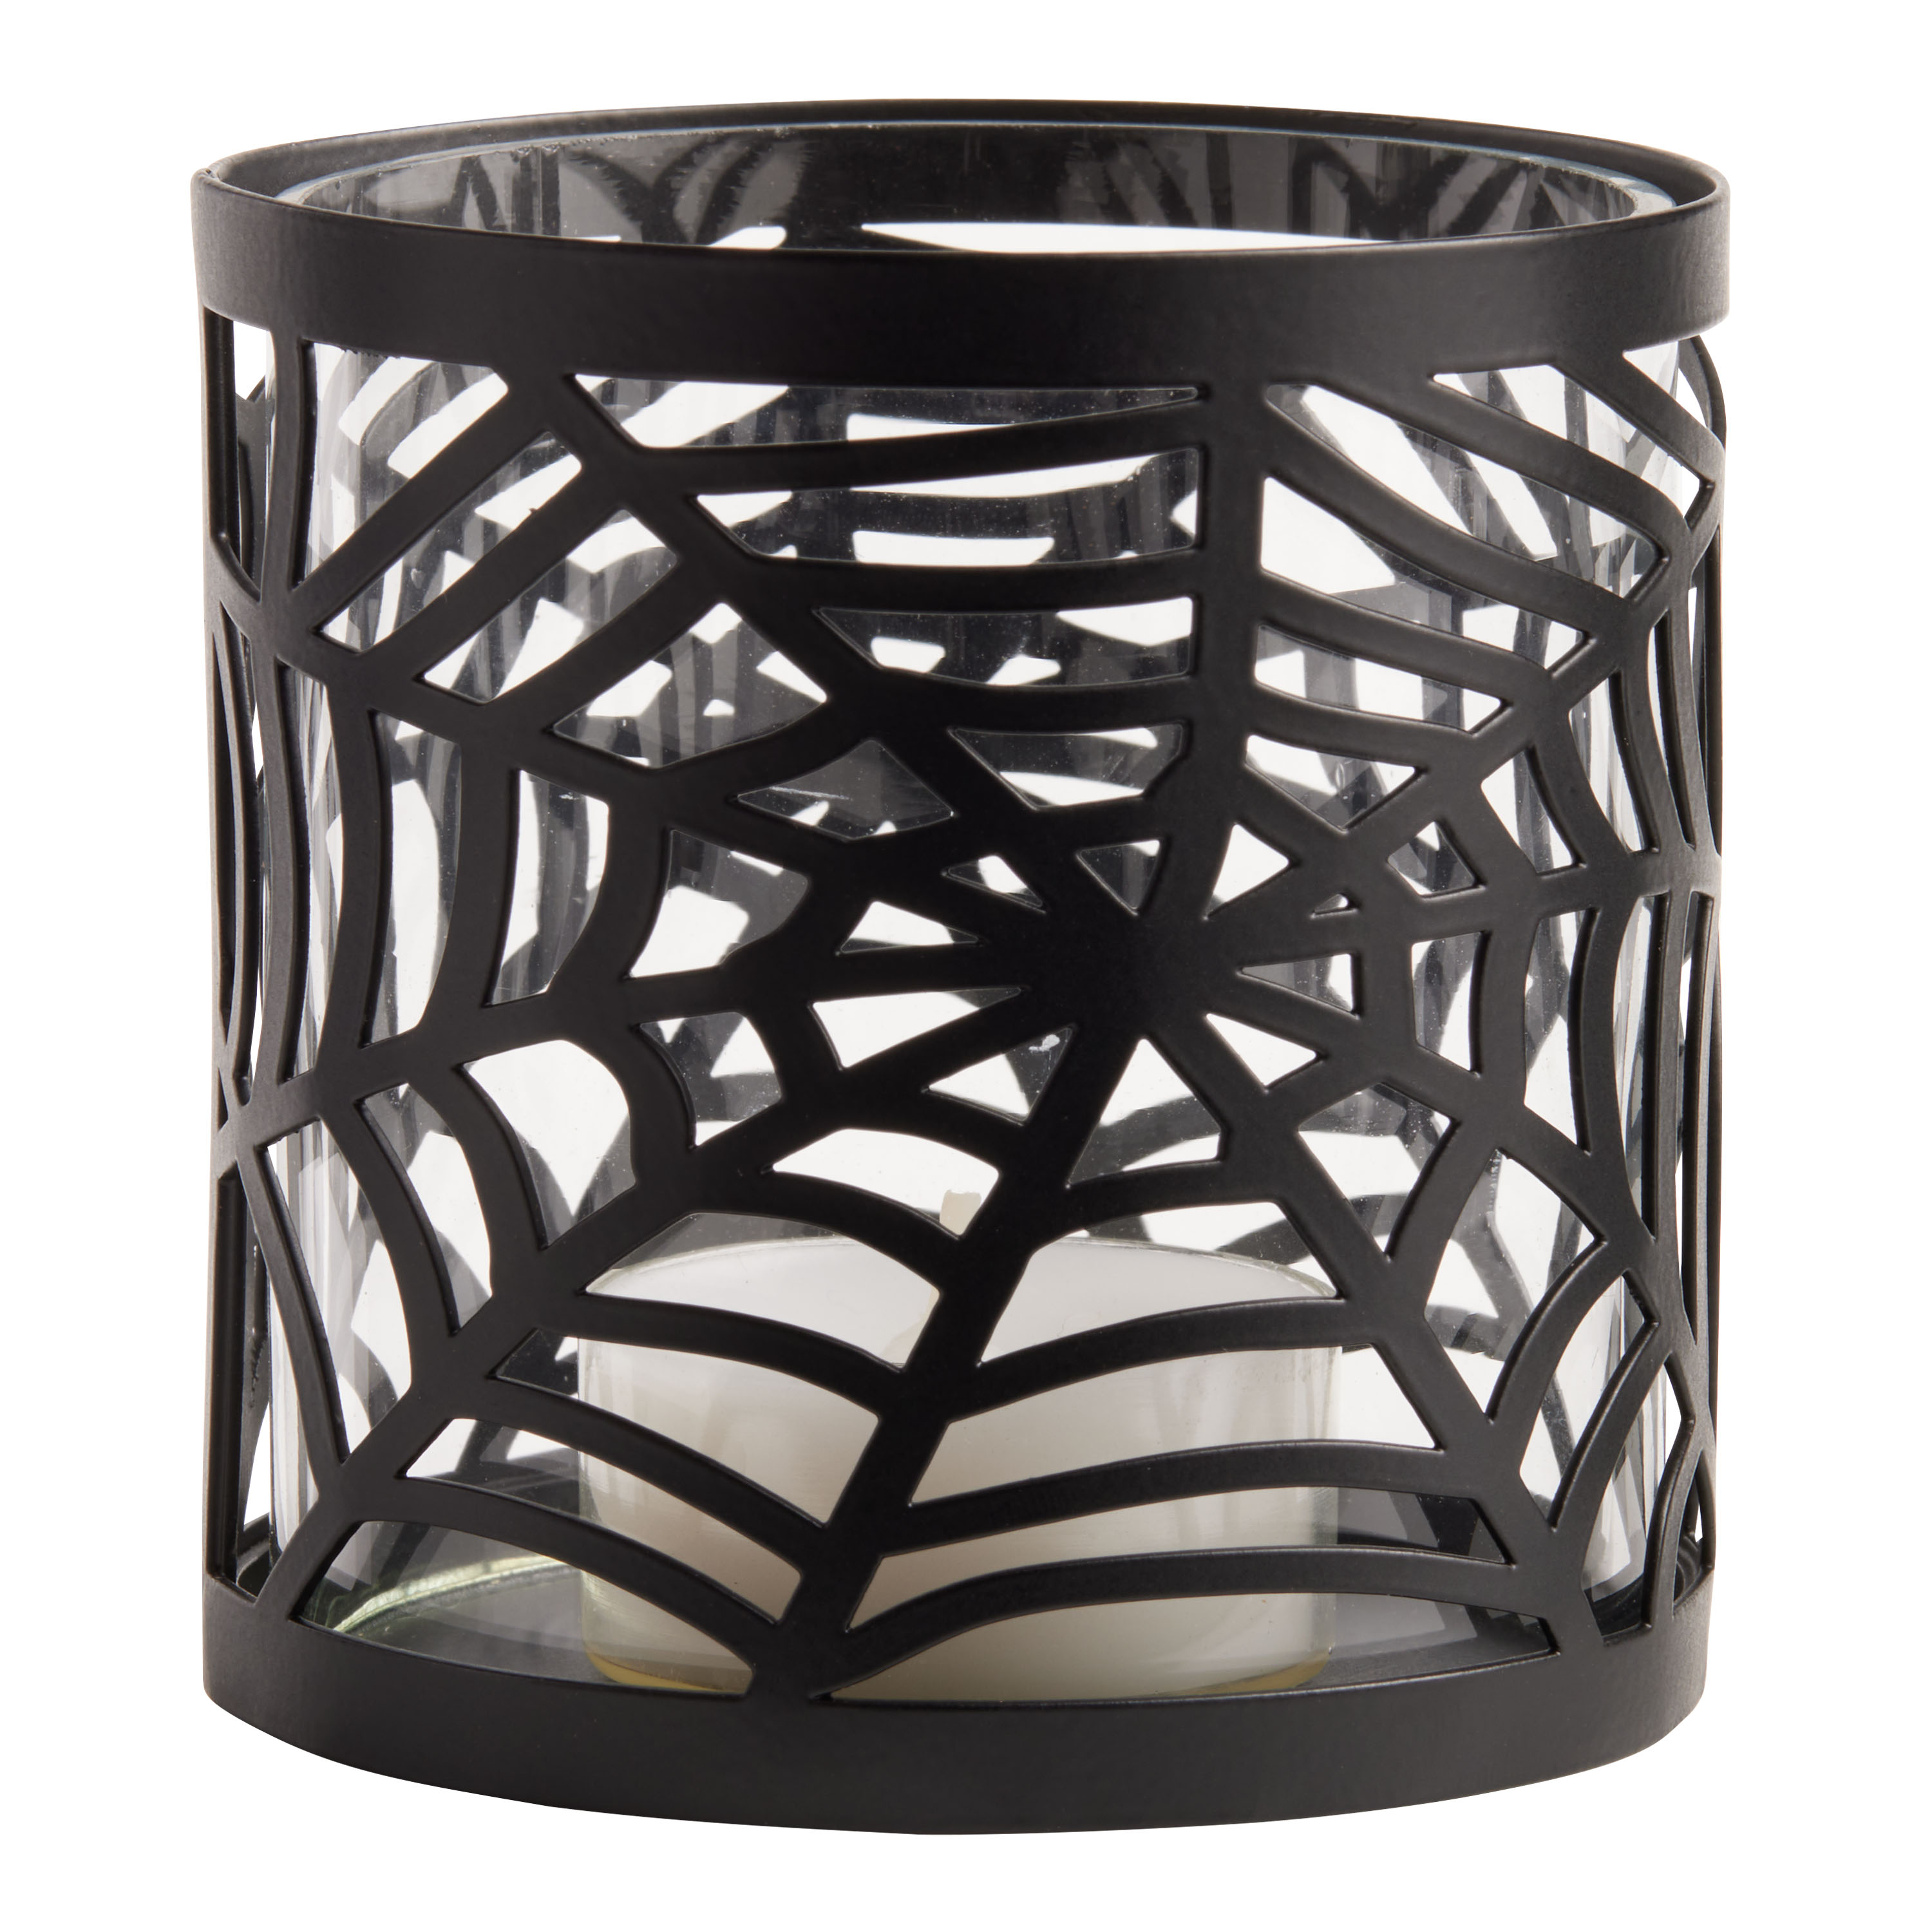 10 Creepy but Cool Candles and Candle Holders top Spice Your